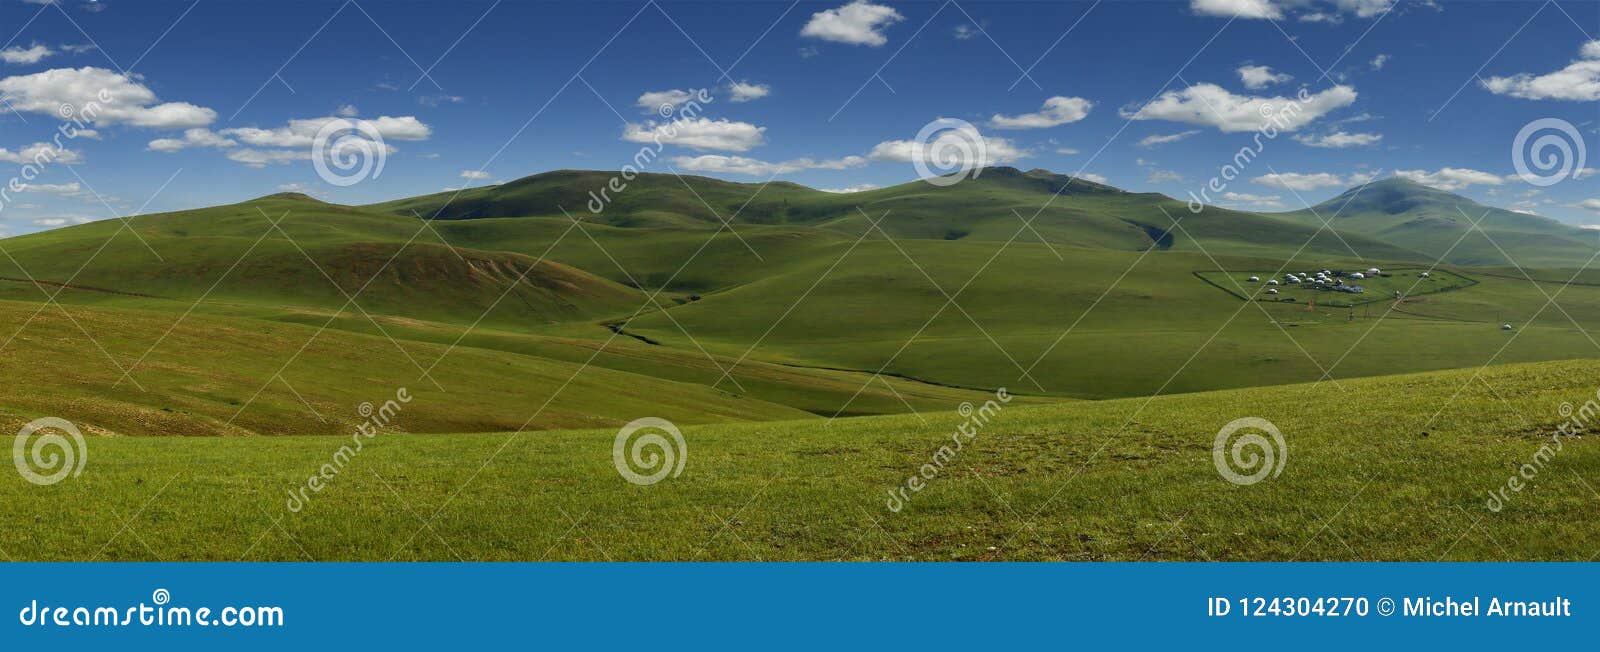 grassland in the steppe of mongolia